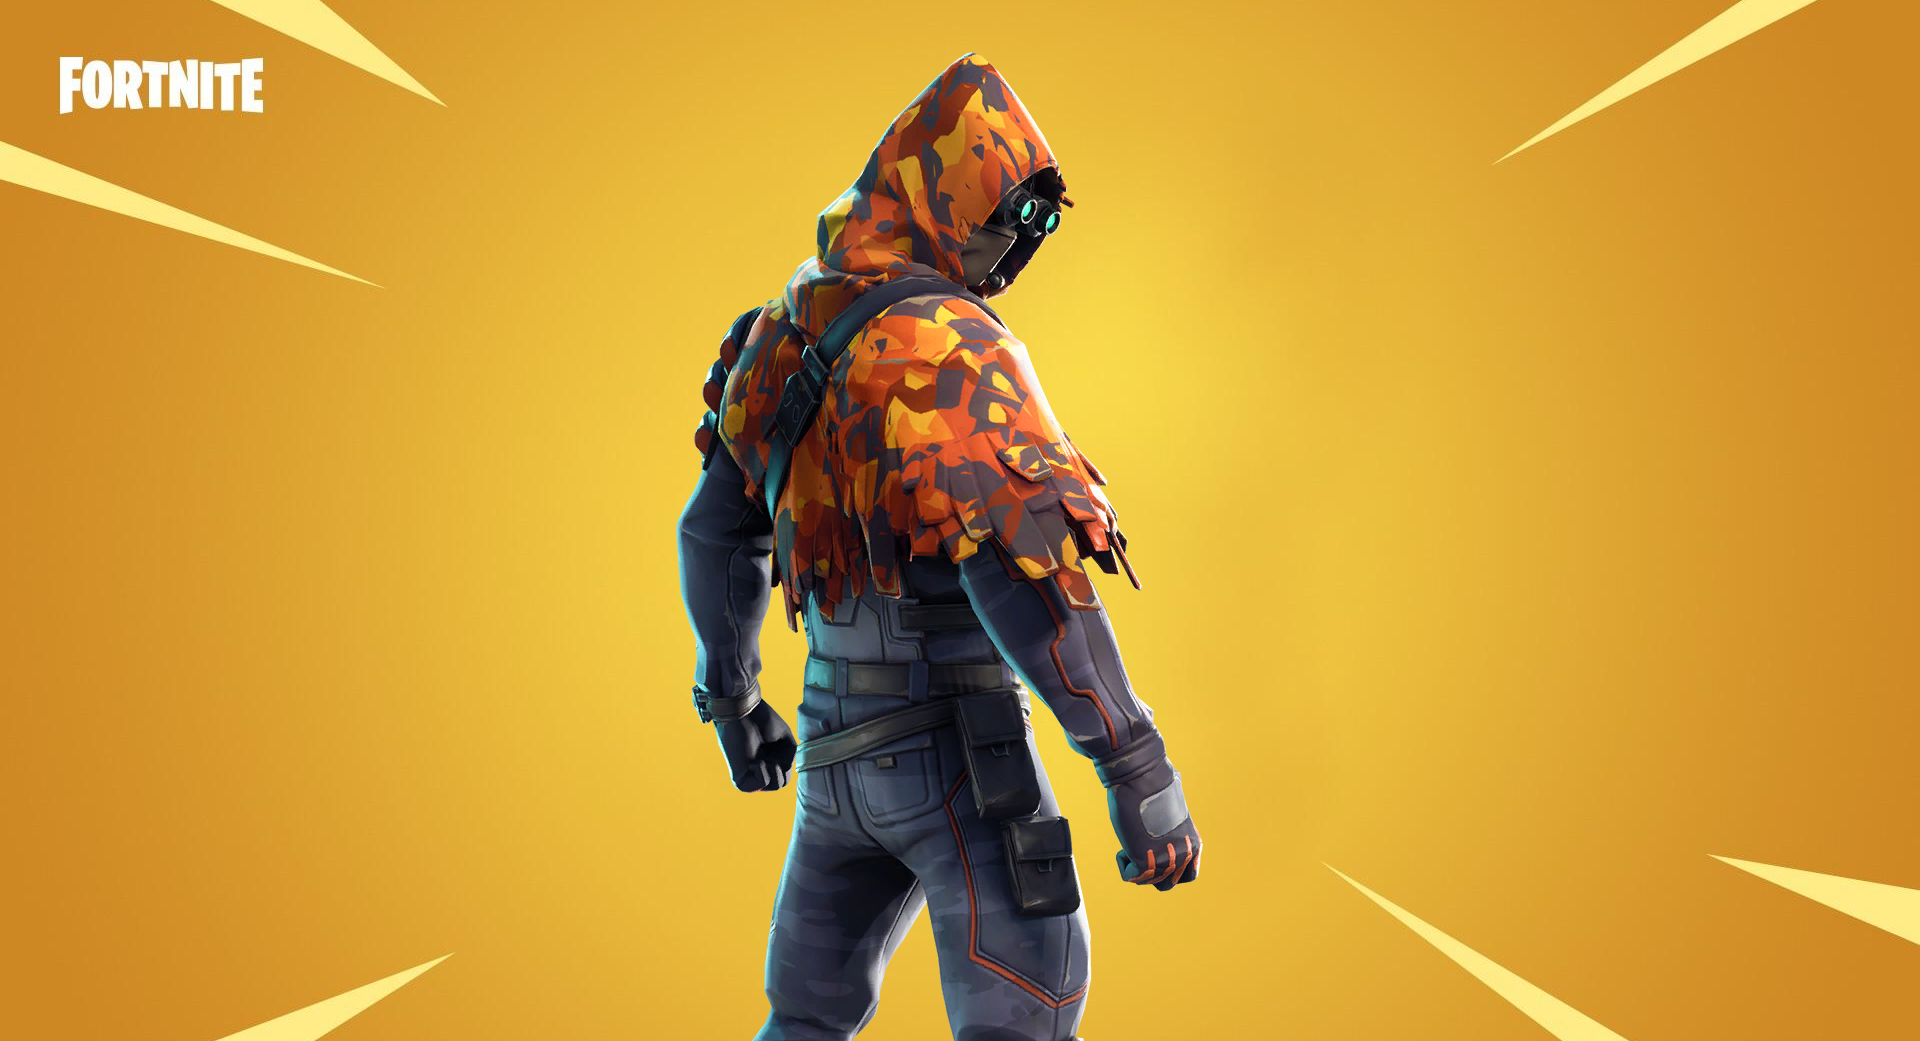 fortnite 6 31 leaks reveal new skins and cosmetics coming to the game - fortnite store leaked skins